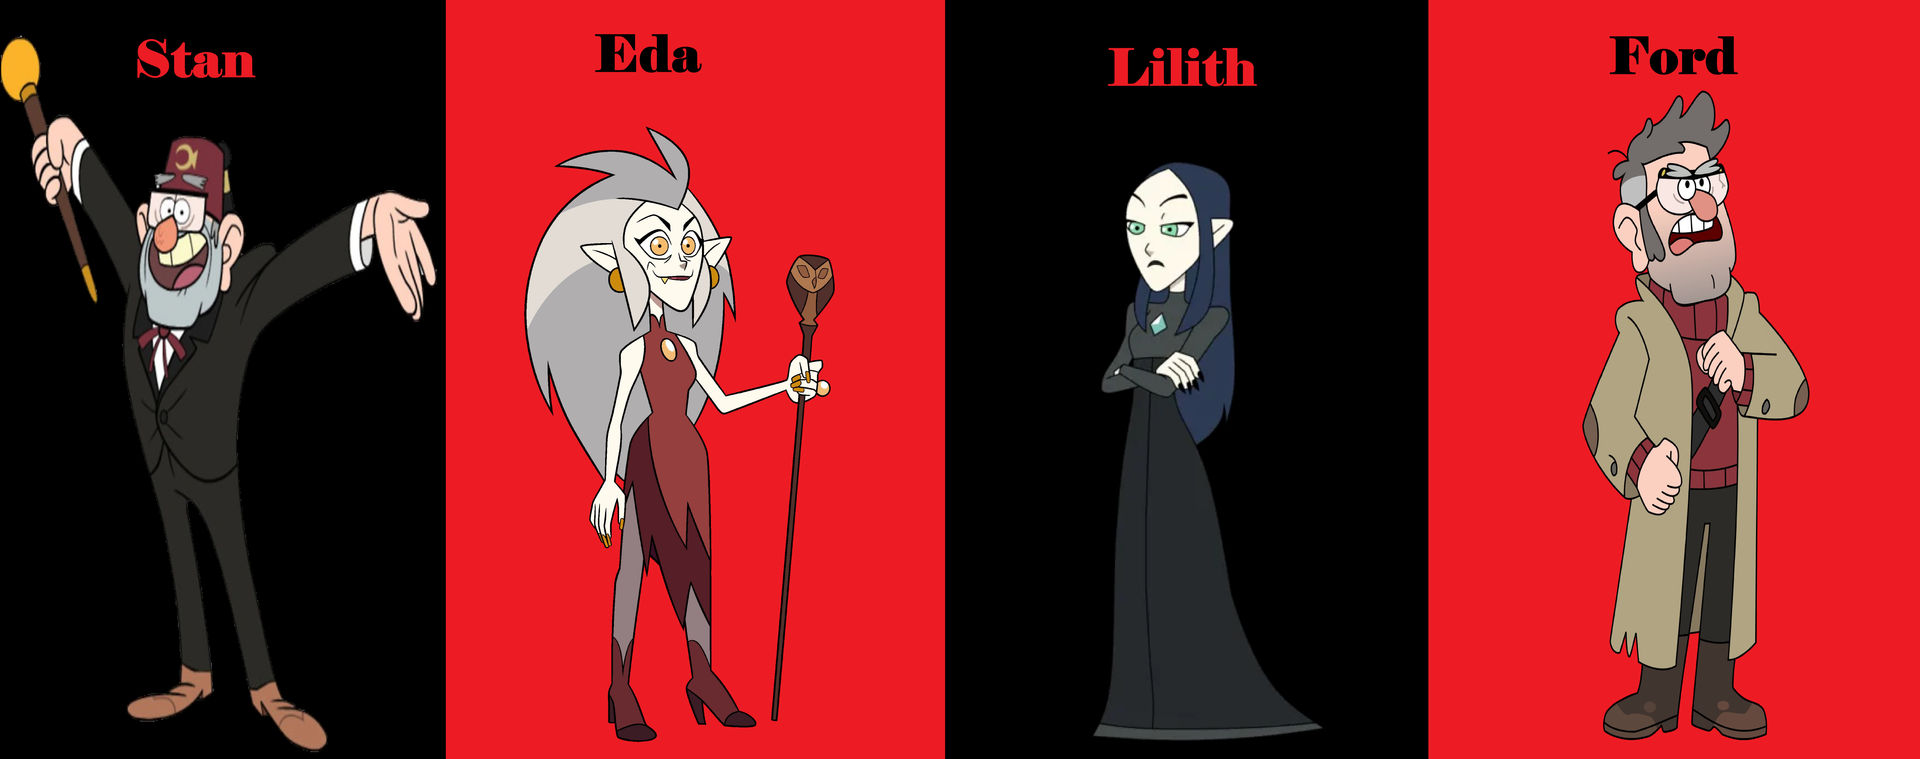 Stan, Eda, Lilith and Ford by AbbaLeanna on DeviantArt